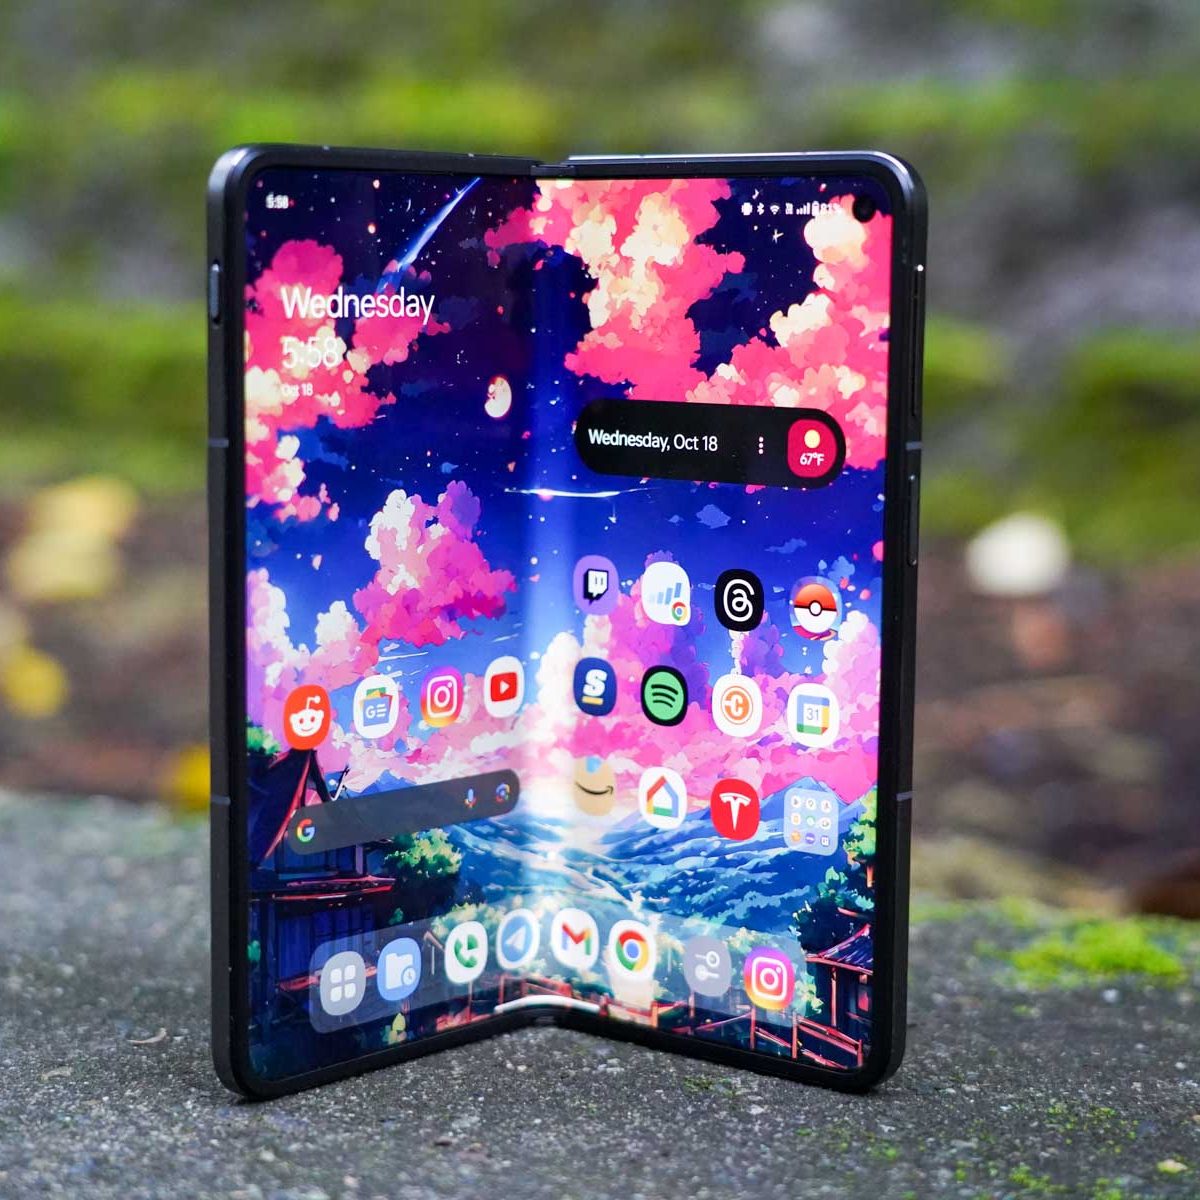 OnePlus Open Official at $1,699 as the Ultimate High-End Foldable